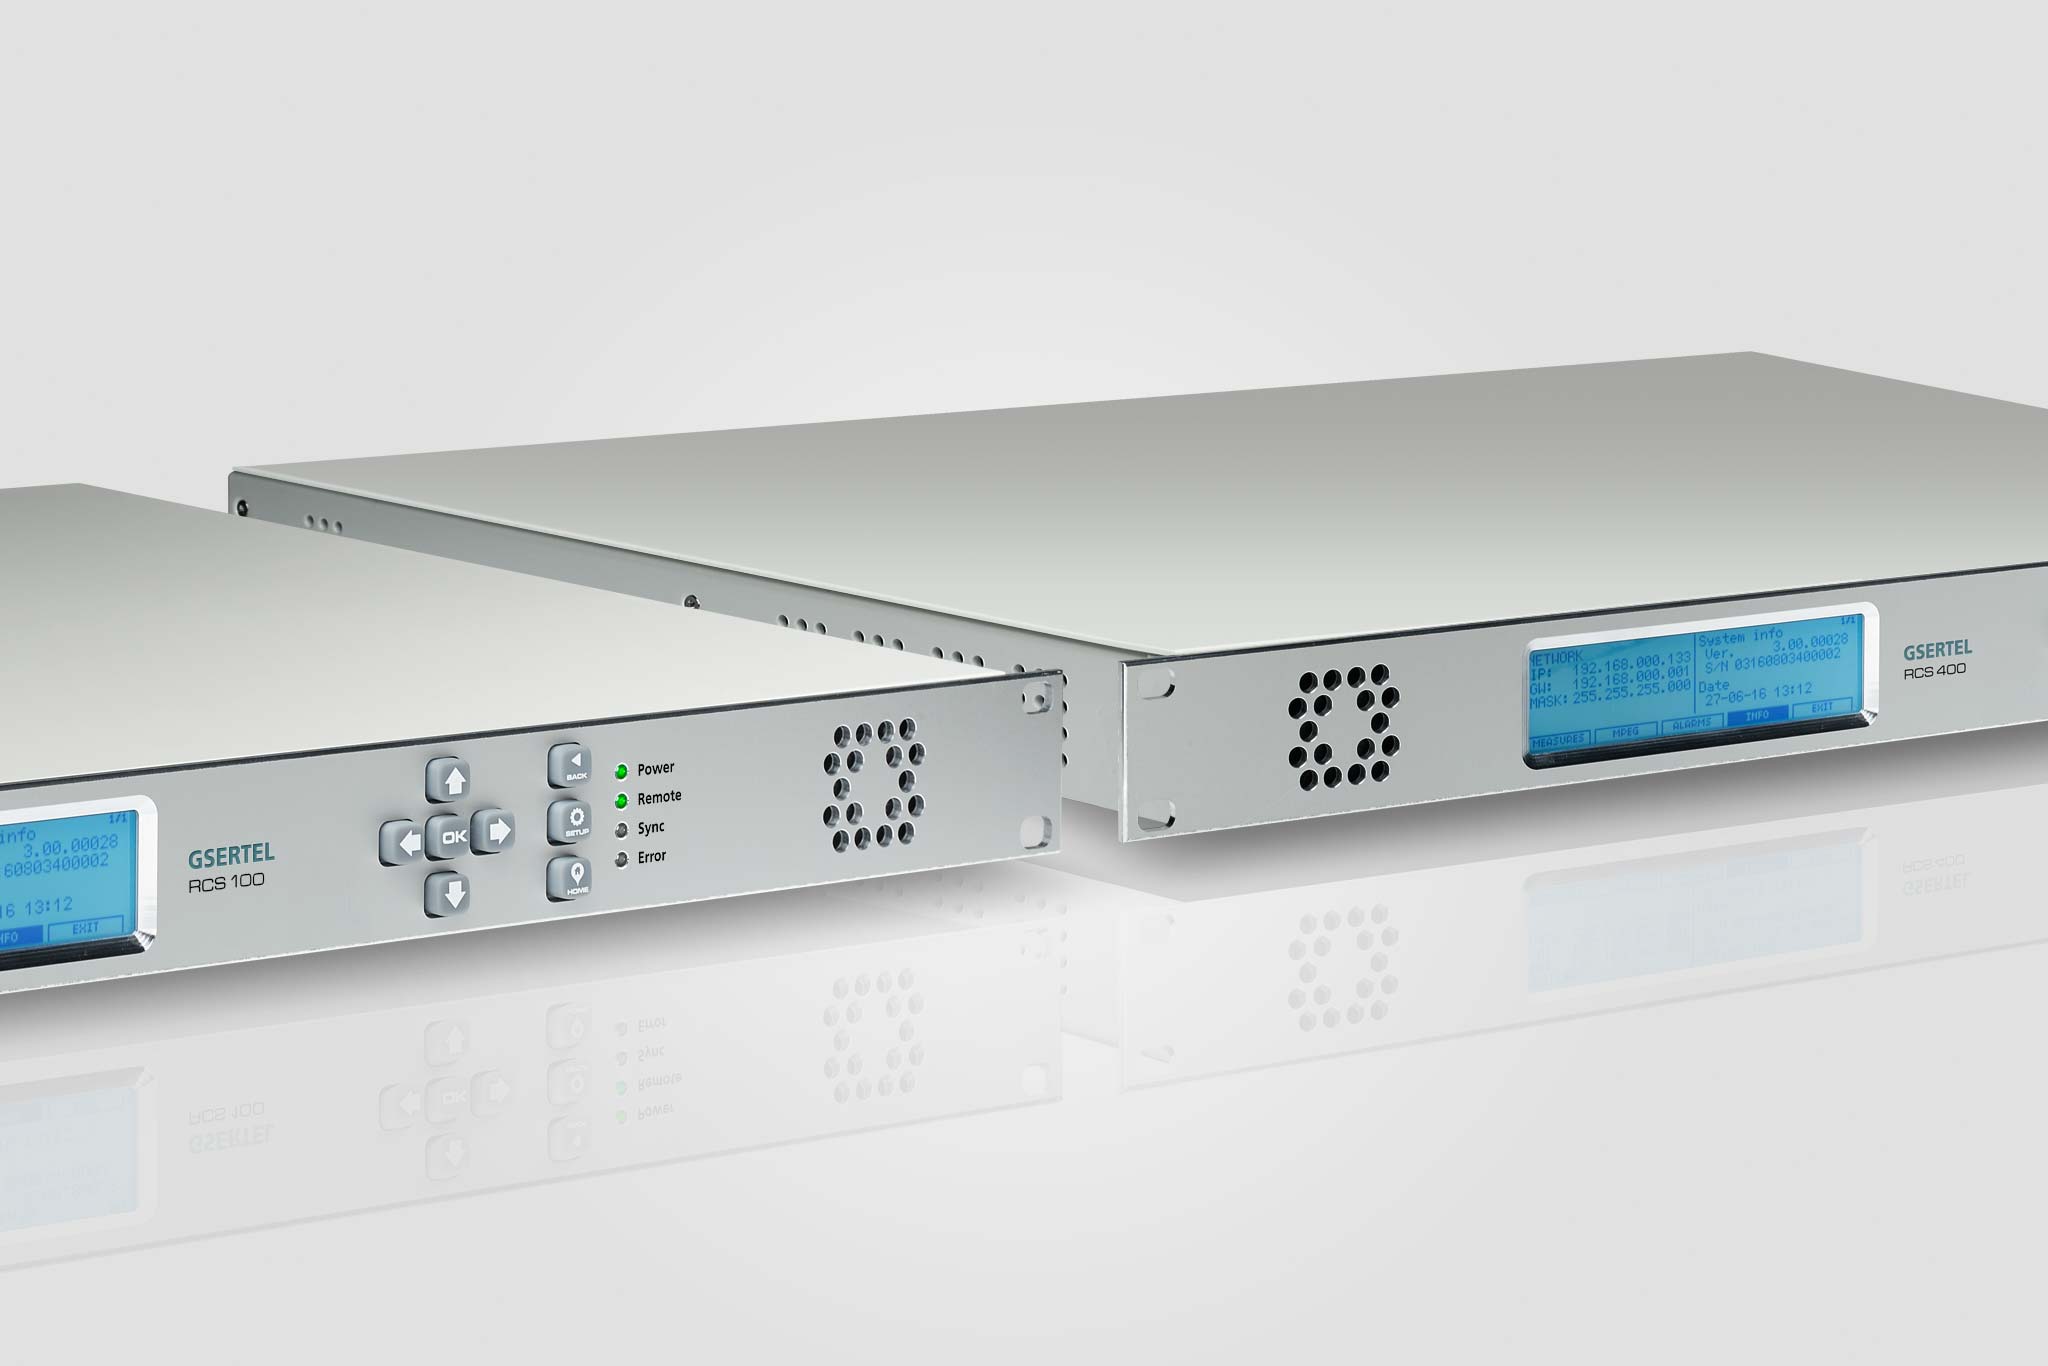 Gsertel unveils the new hardware platform of the monitoring solution RCS